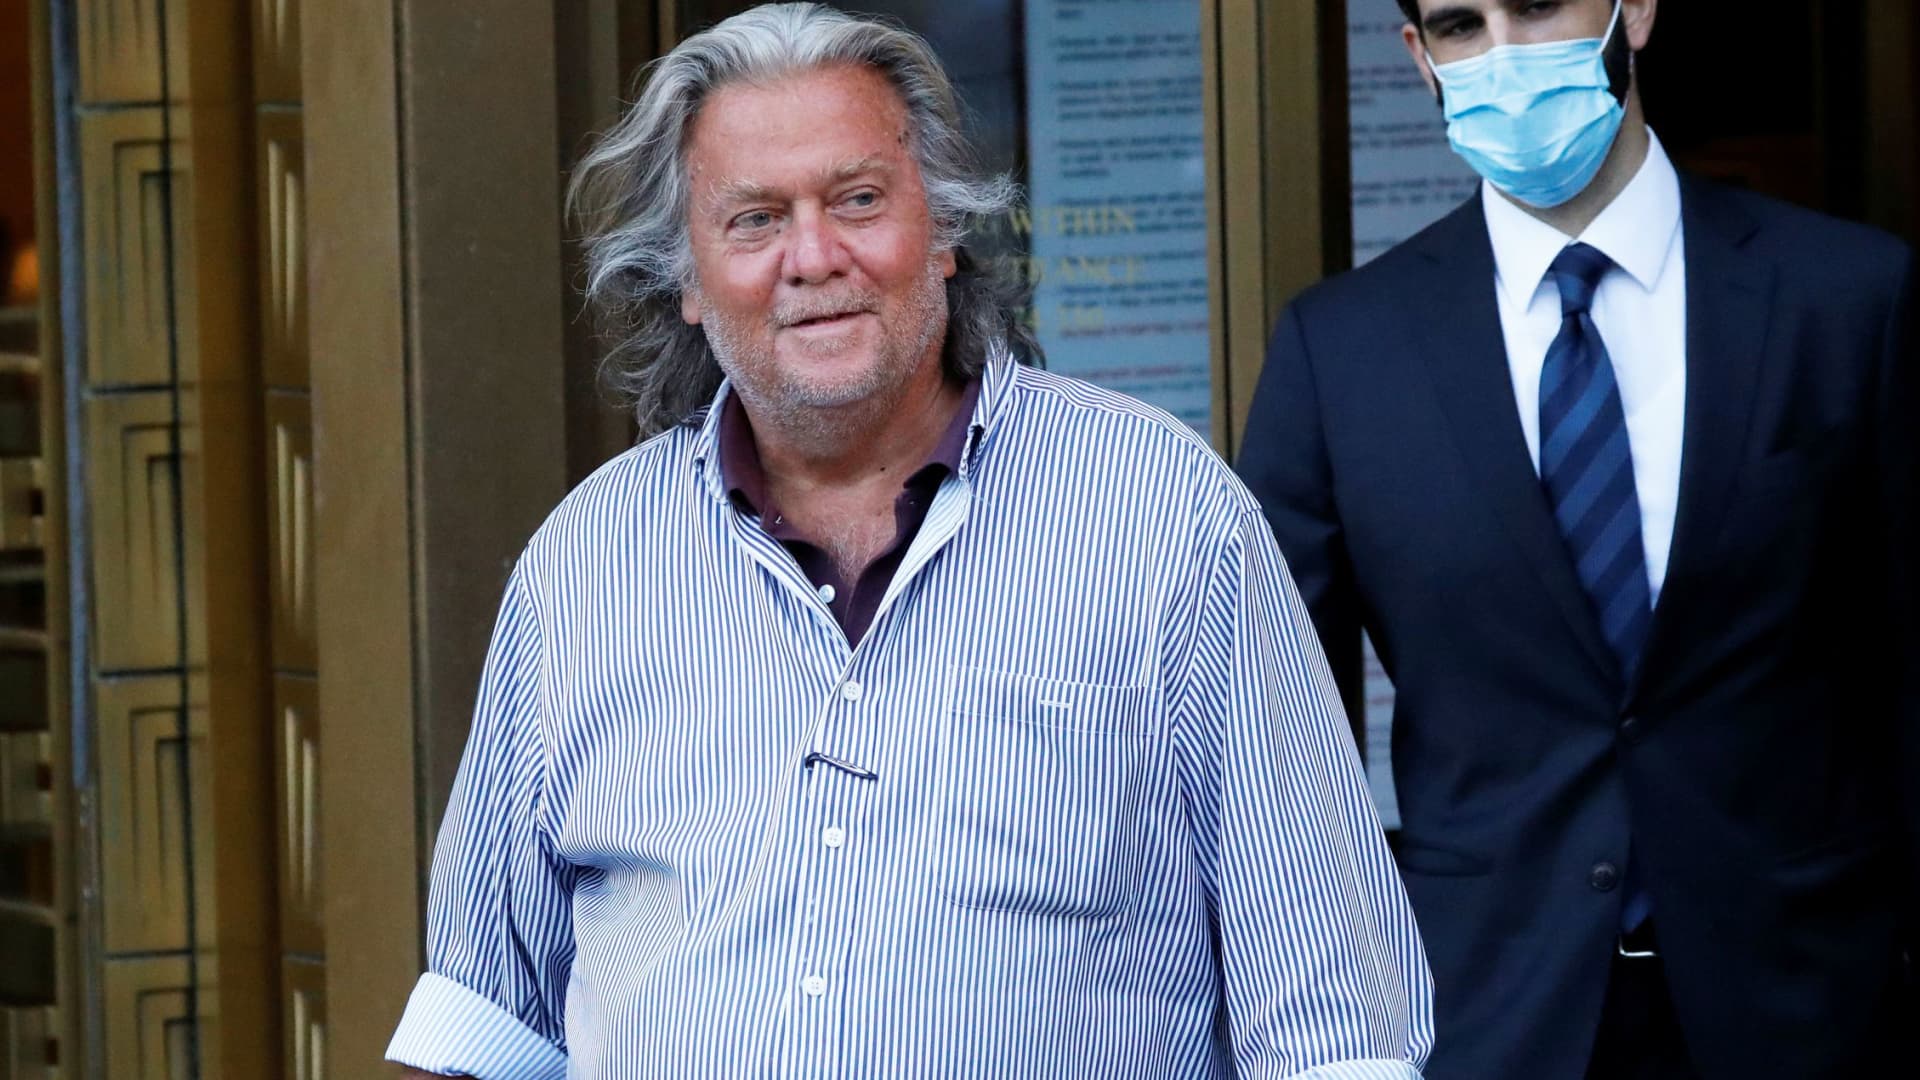 Former White House Chief Strategist Steve Bannon exits the Manhattan Federal Court, following his arraignment hearing for conspiracy to commit wire fraud and conspiracy to commit money laundering, in New York, August 20, 2020.